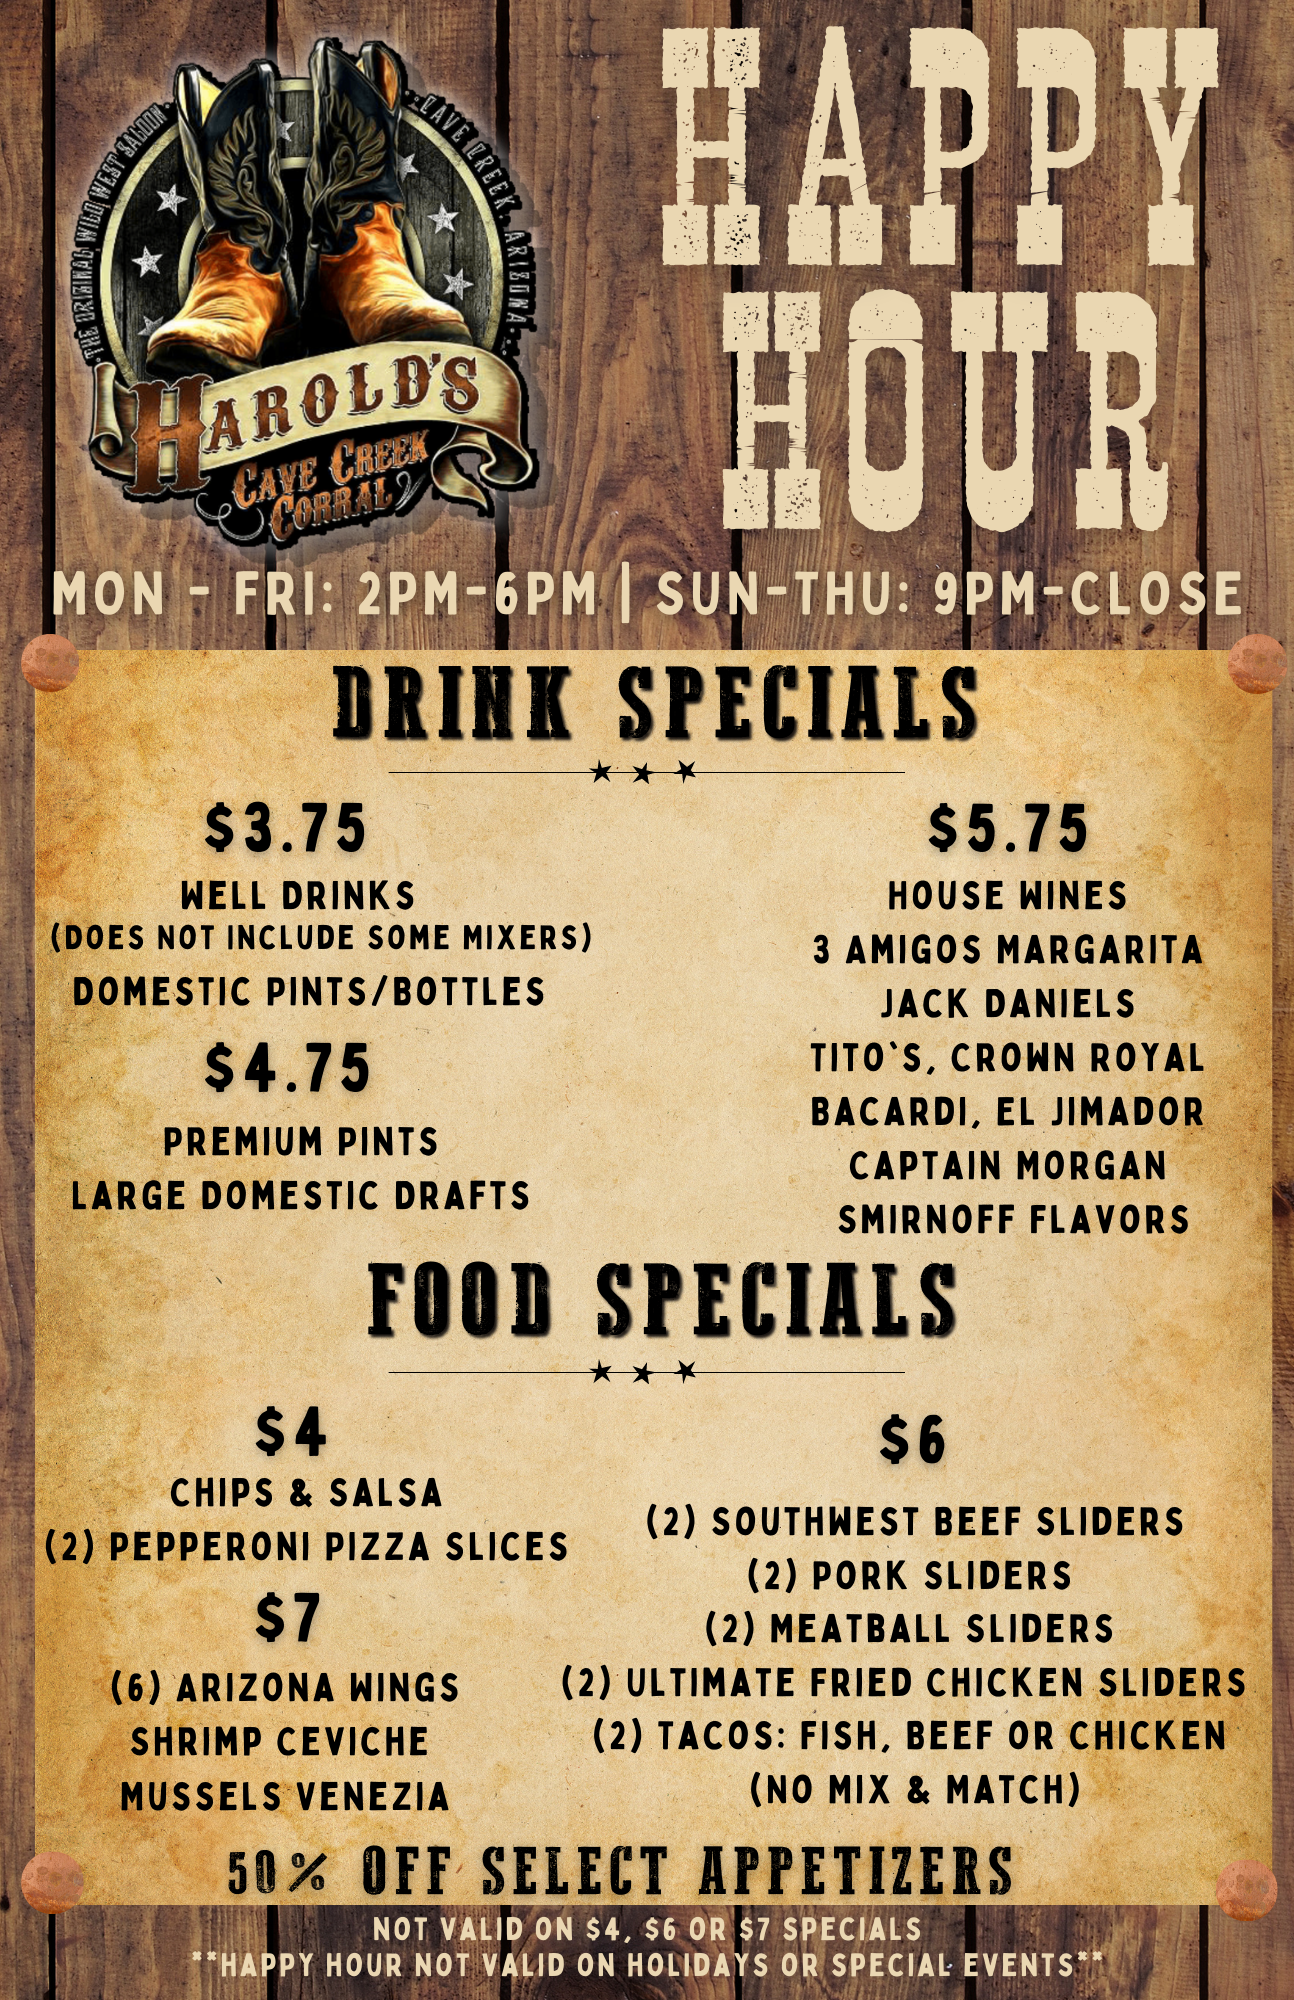 Happy Hour at Harold's Corral